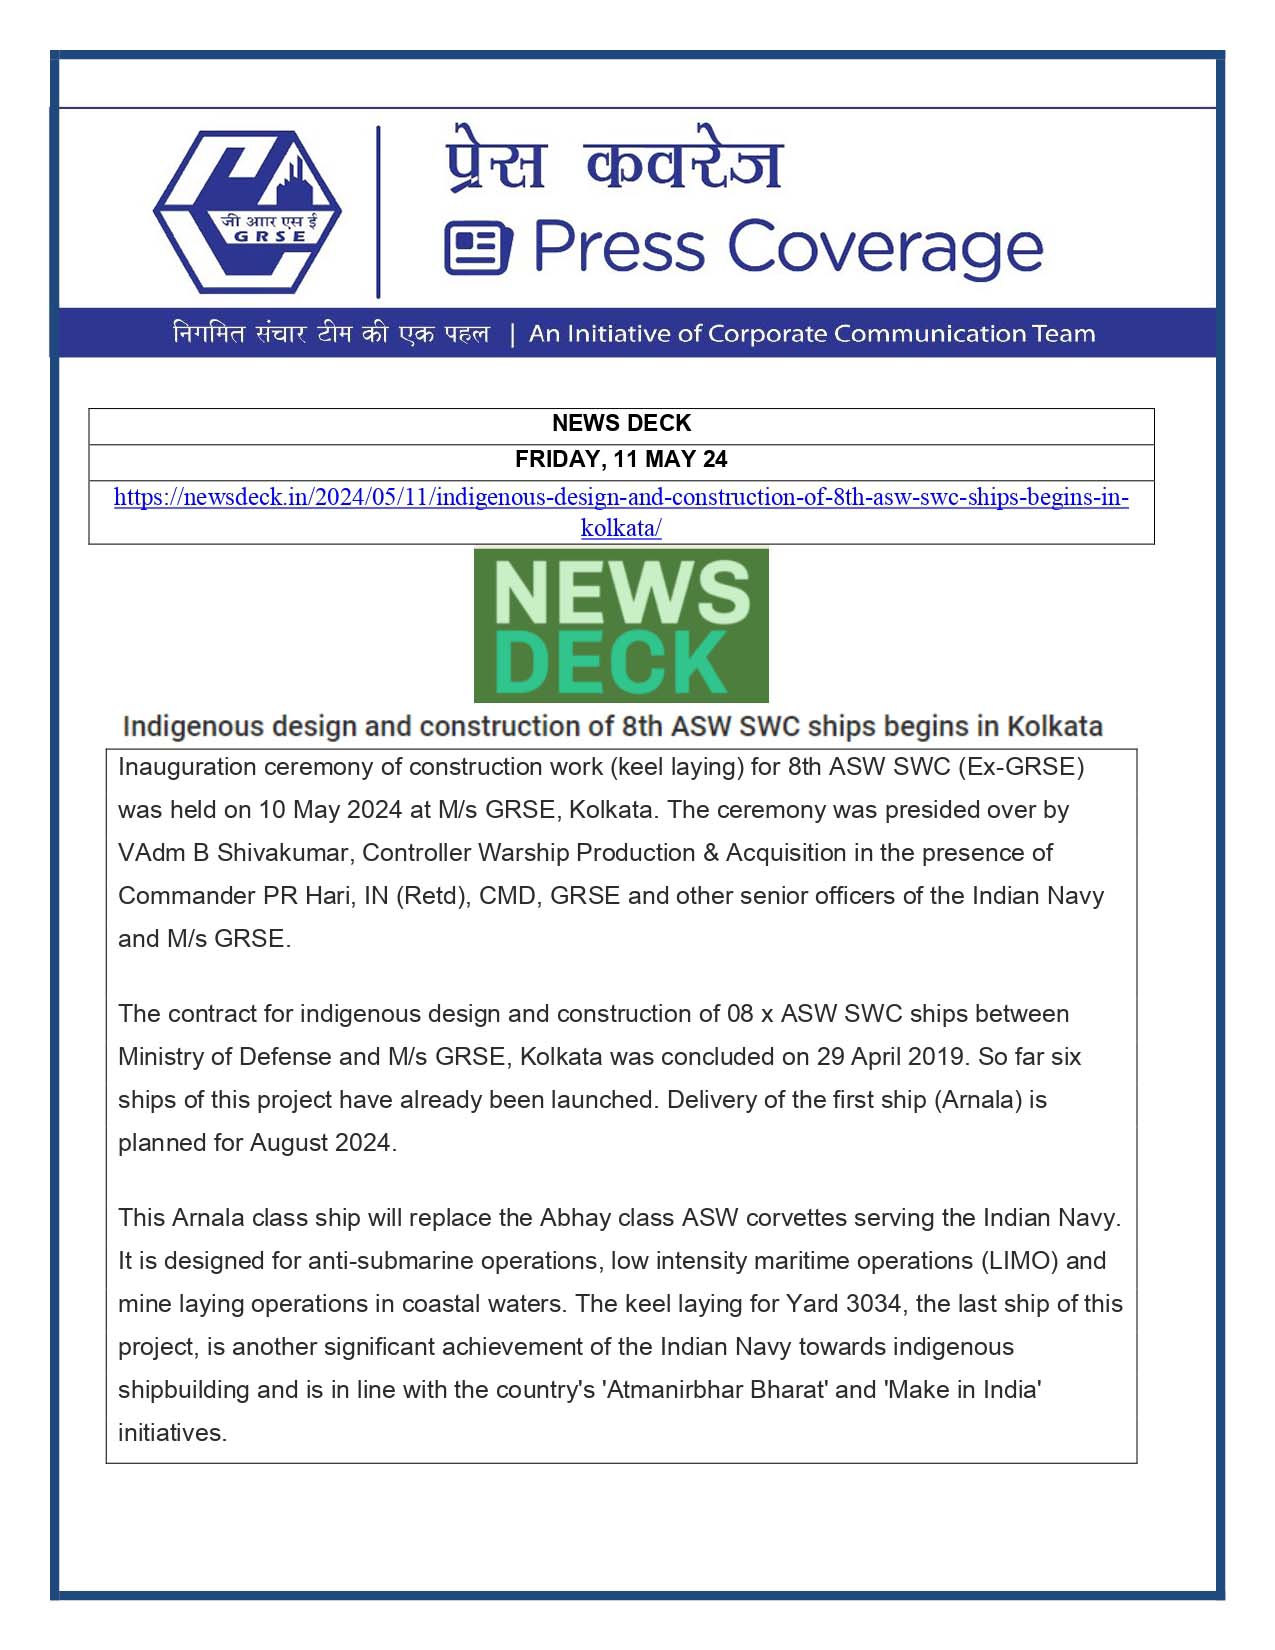 Press Coverage : News Deck, 11 May 24 : Indigenous design and construction of 8th ASW SWC ships begins in Kolkata